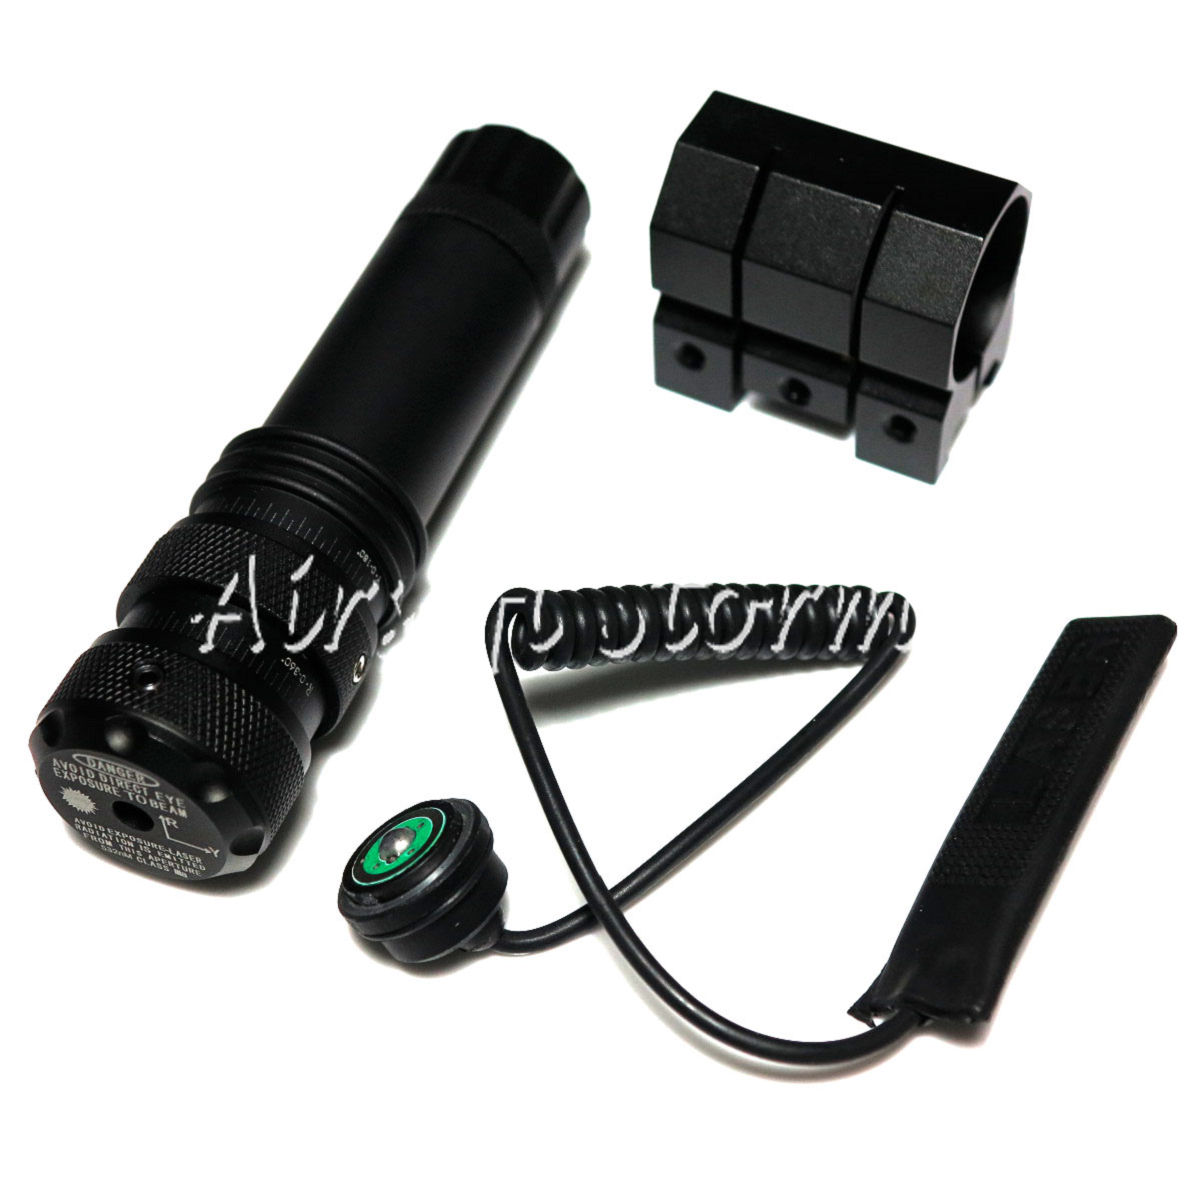 LXGD Tactical Gear High Power Visible Green Laser Sight Pointer JG-017 - Click Image to Close